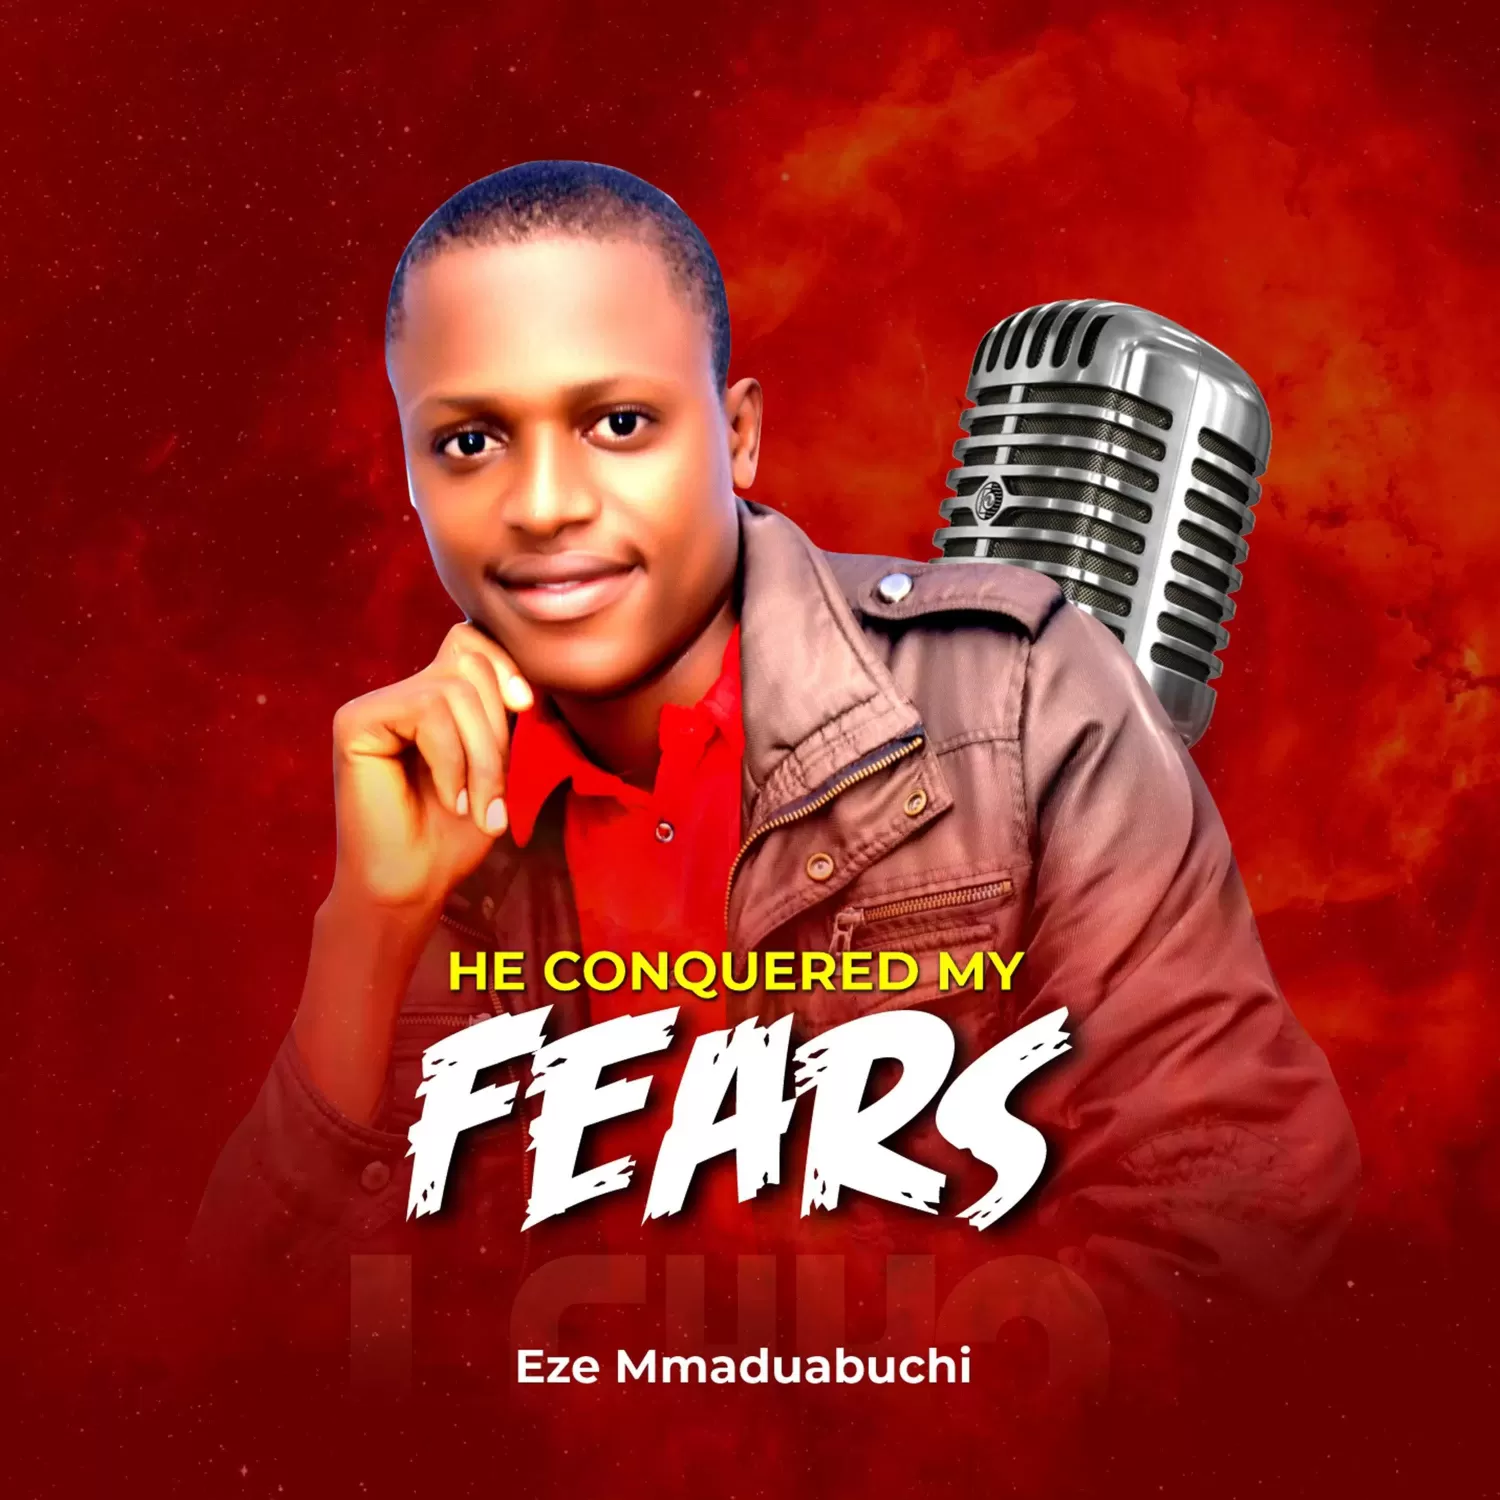 He conquered my fears by Eze Mmaduabuchi